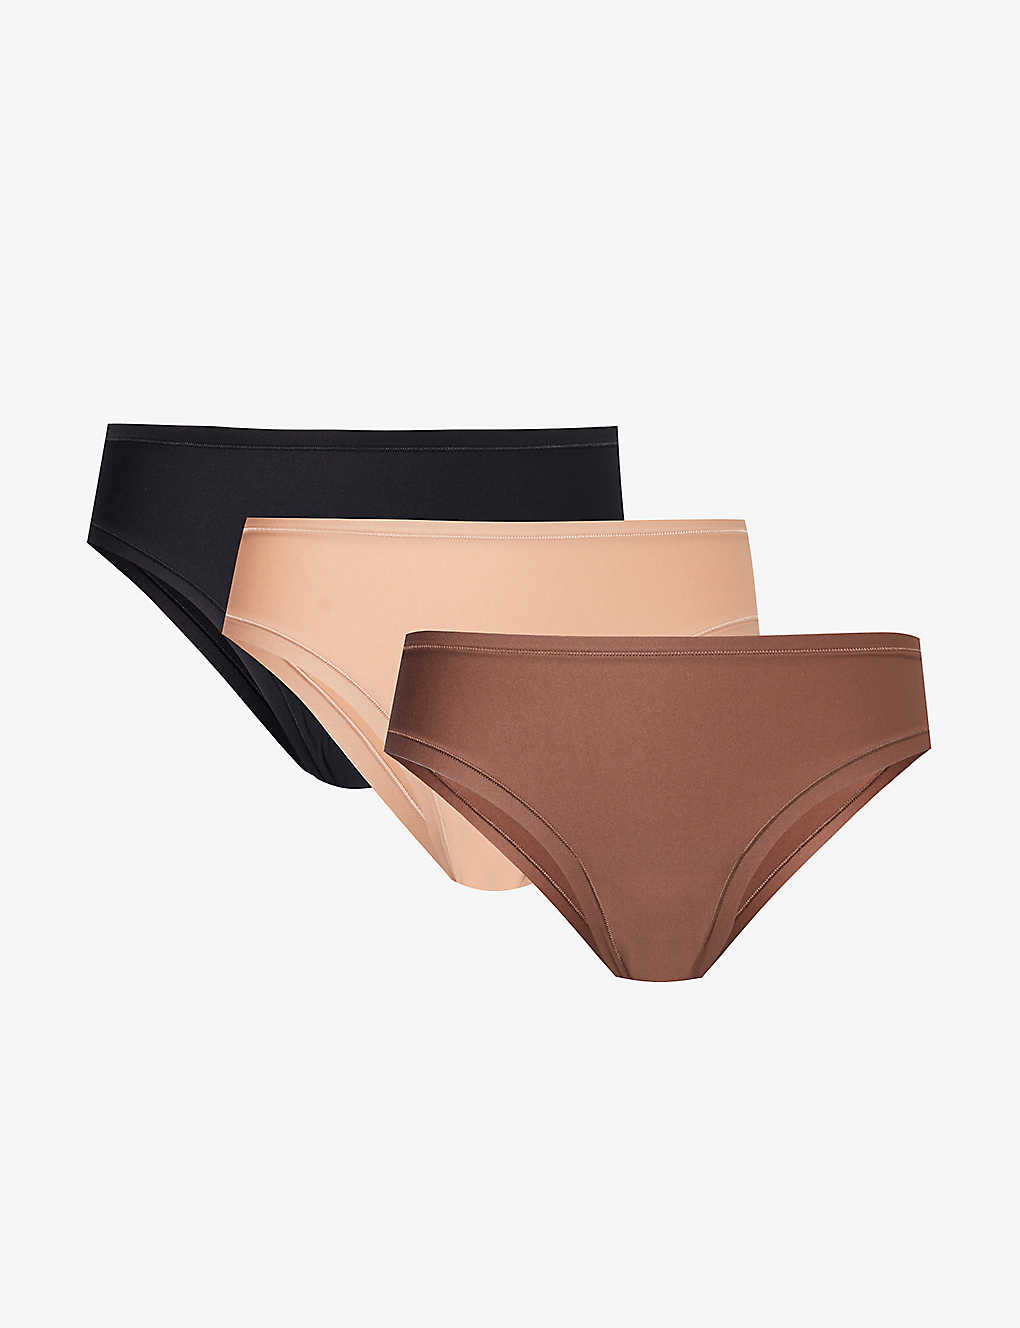 Lounge Underwear High-rise Pack Of Three Stretch-recycled Polyamide Briefs In Black/chesnut/honey